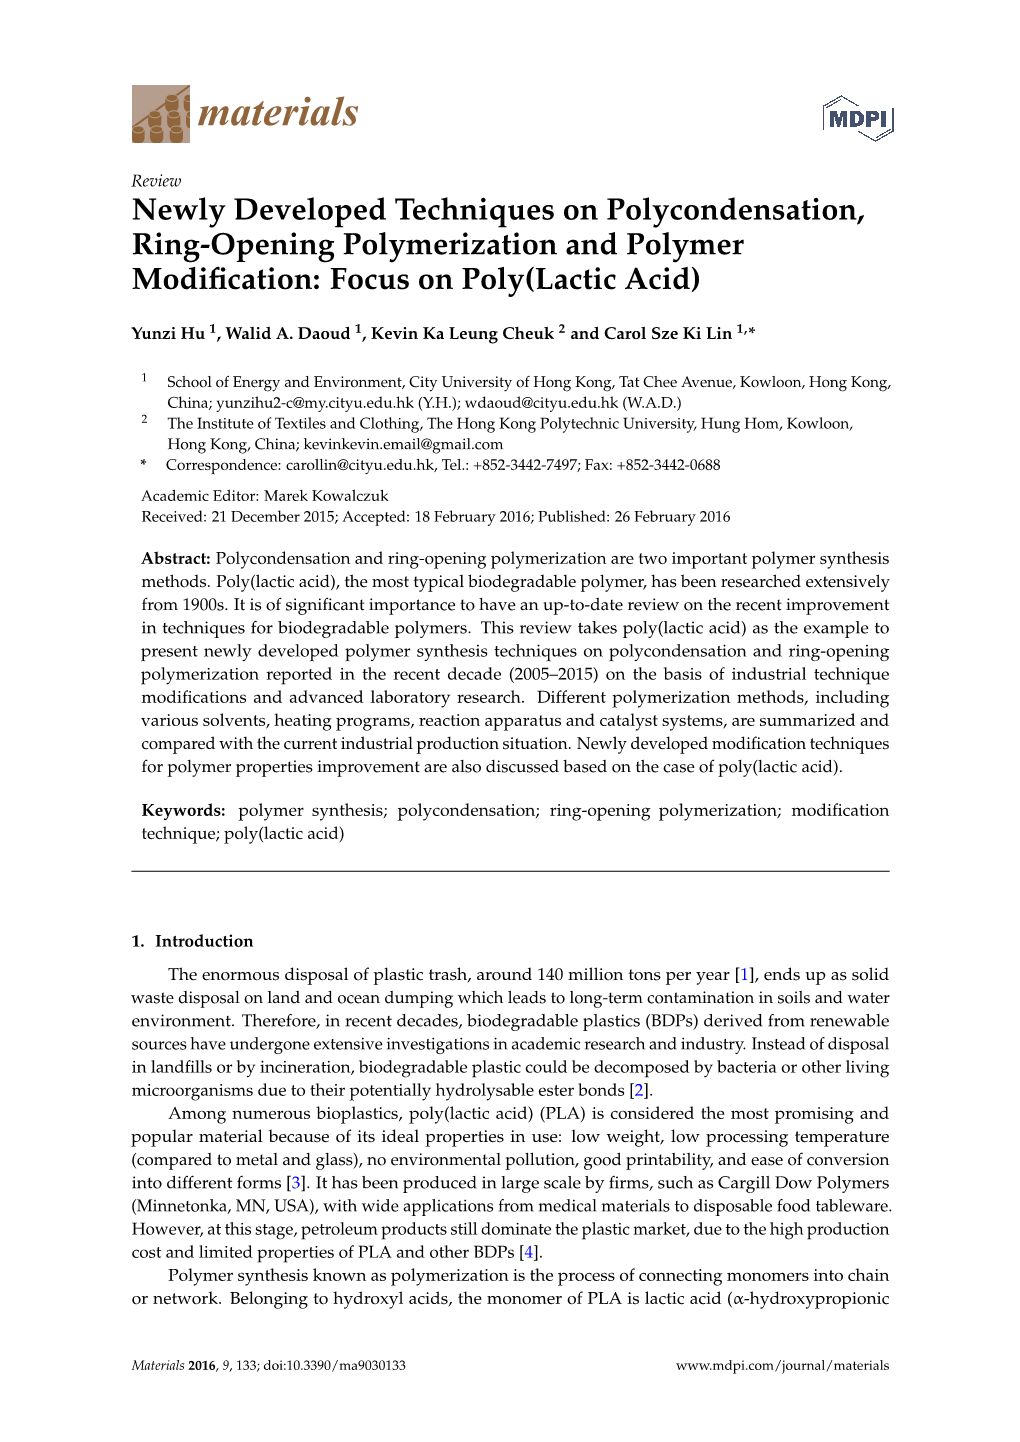 Newly Developed Techniques on Polycondensation, Ring-Opening Polymerization and Polymer Modiﬁcation: Focus on Poly(Lactic Acid)